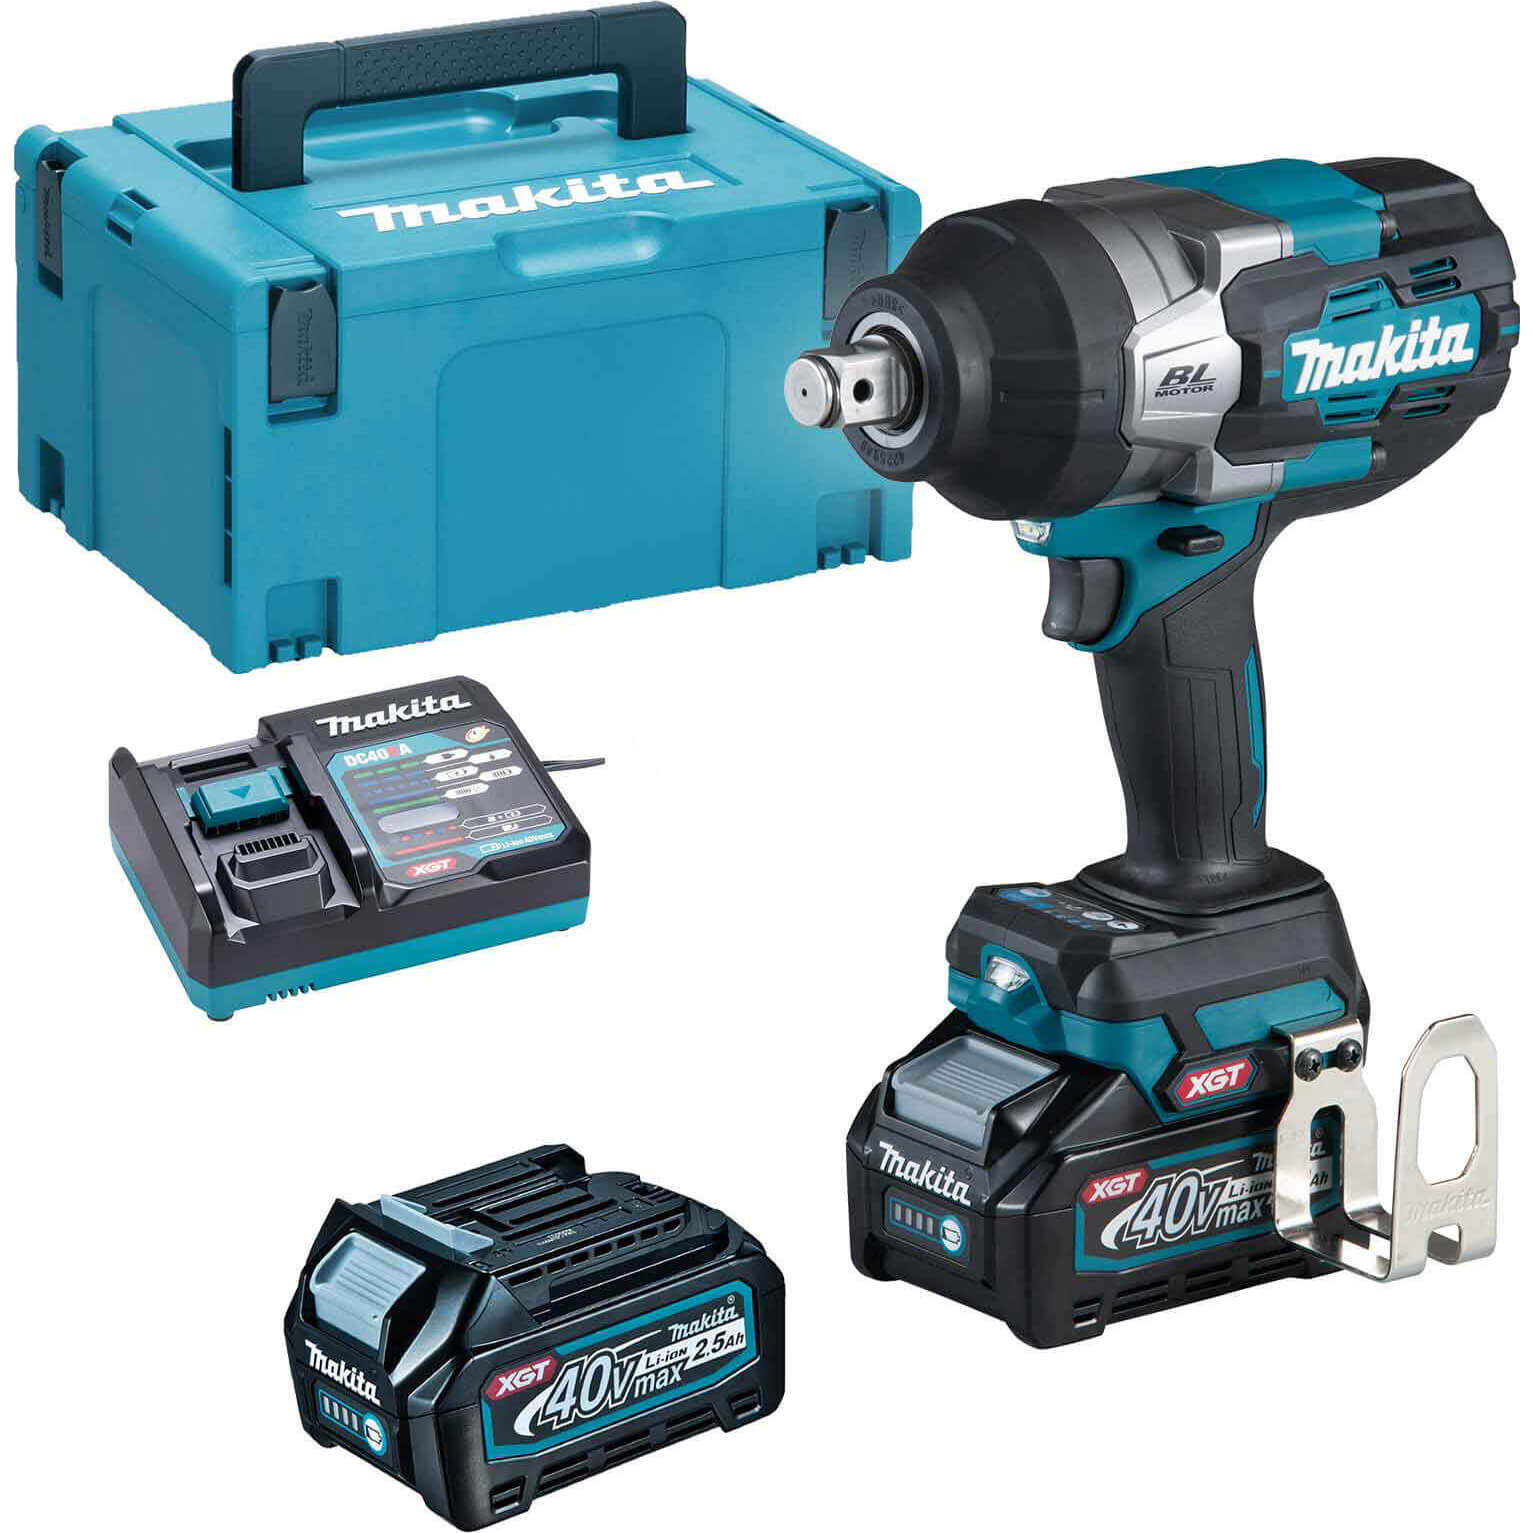 Image of Makita TW001G 40v Max XGT Cordless Brushless 3/4" Drive Impact Wrench 2 x 2.5ah Li-ion Charger Case